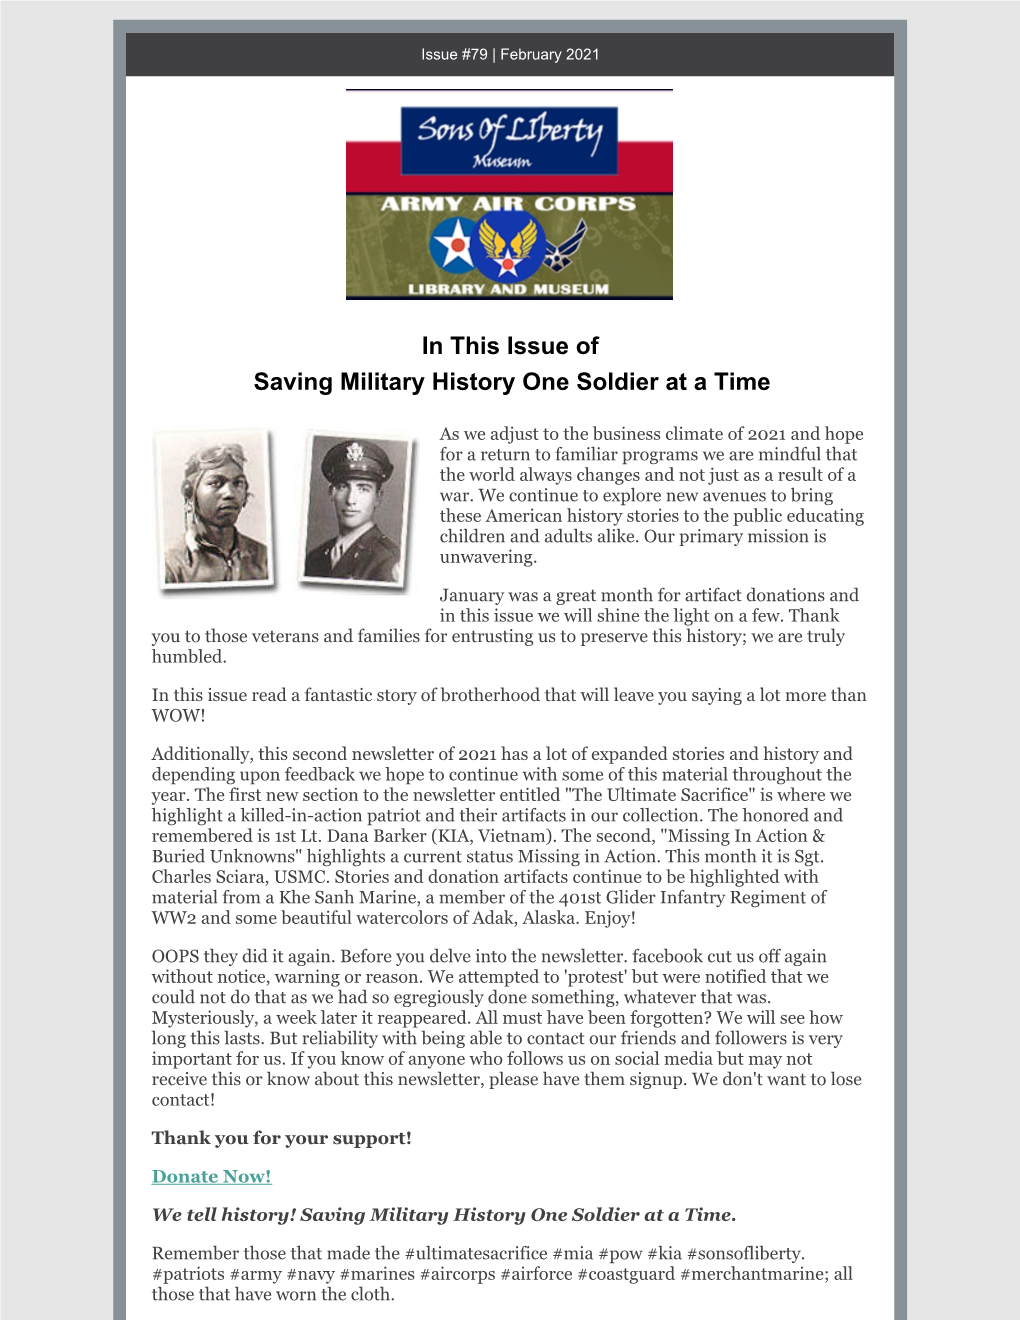 In This Issue of Saving Military History One Soldier at a Time